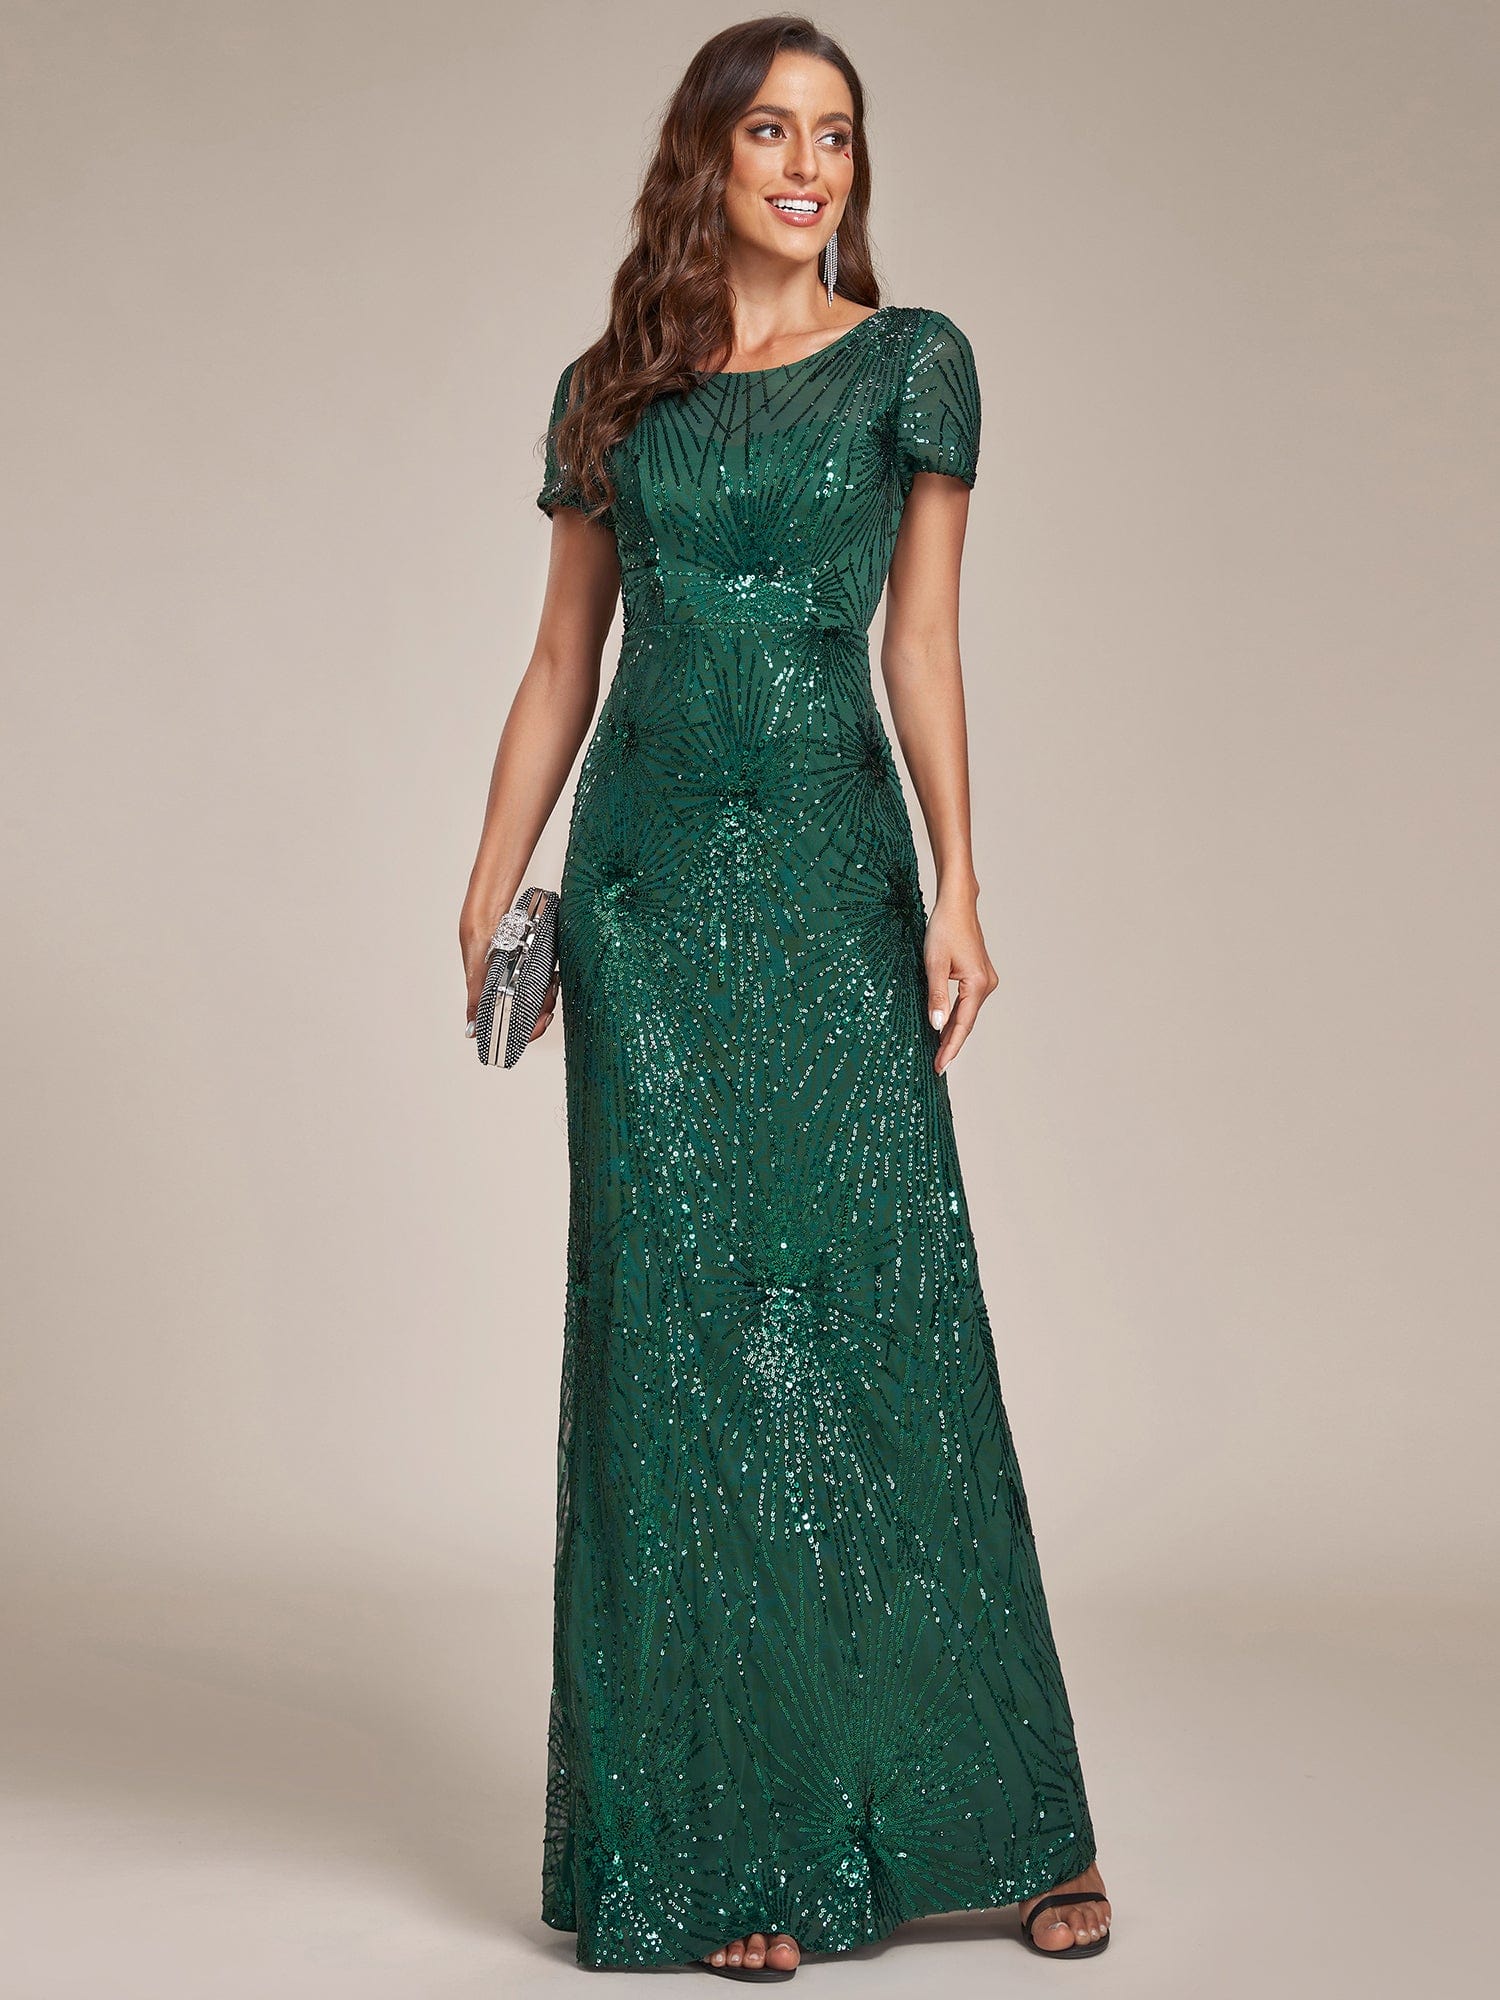 Emerald Green Dresses – Page 4 - Ever-Pretty UK